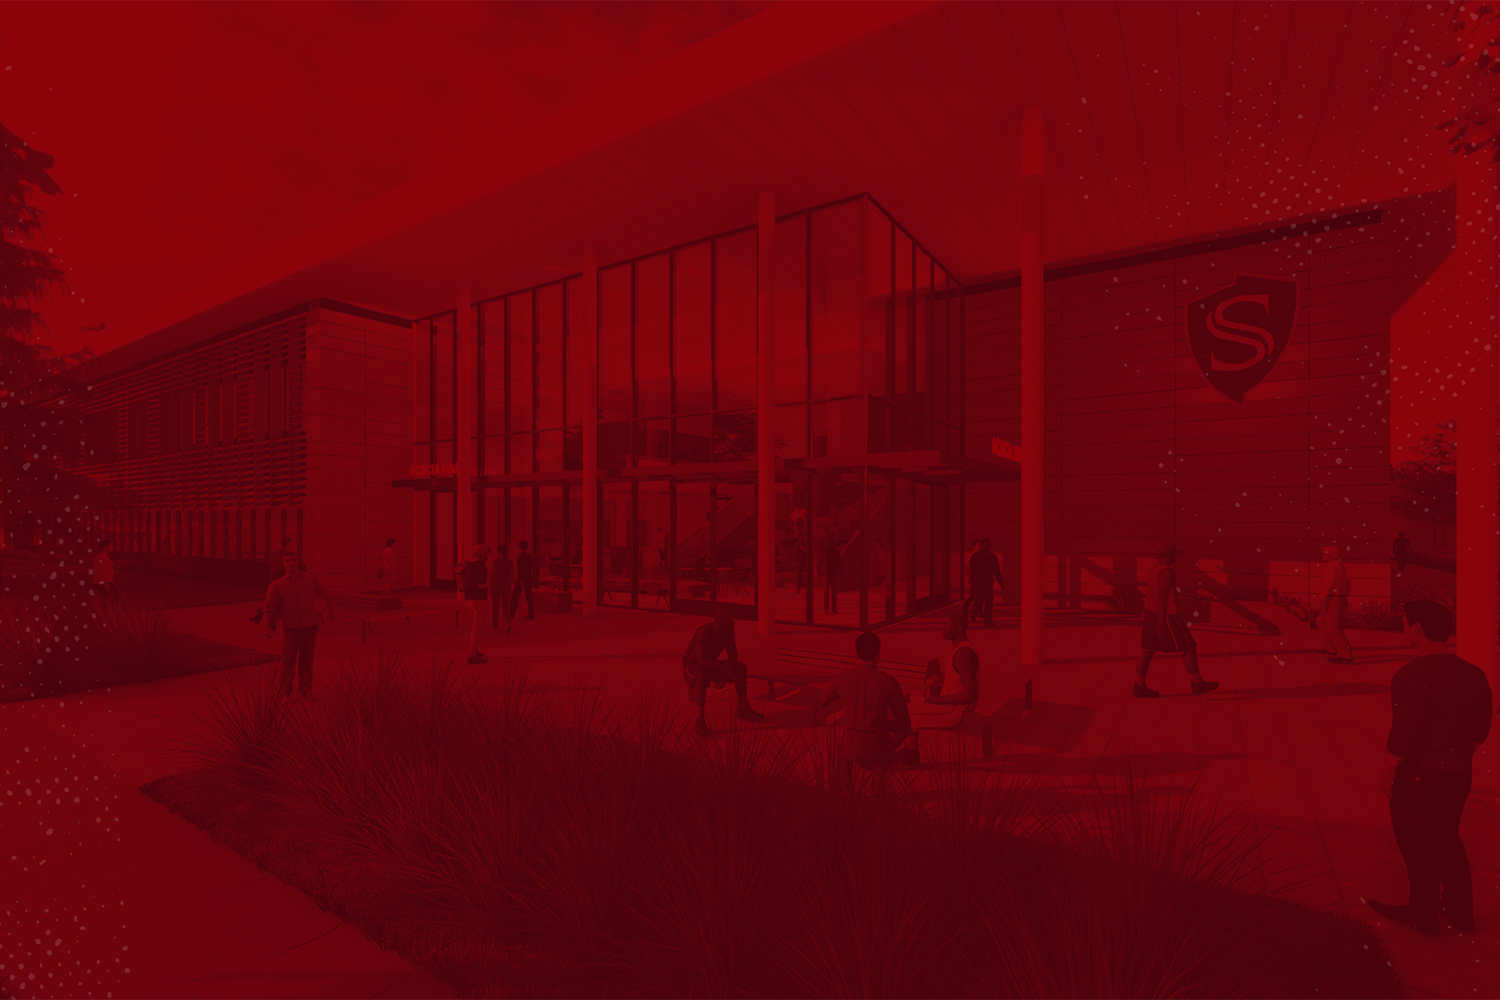 Image of new Stockton building with red overlay.